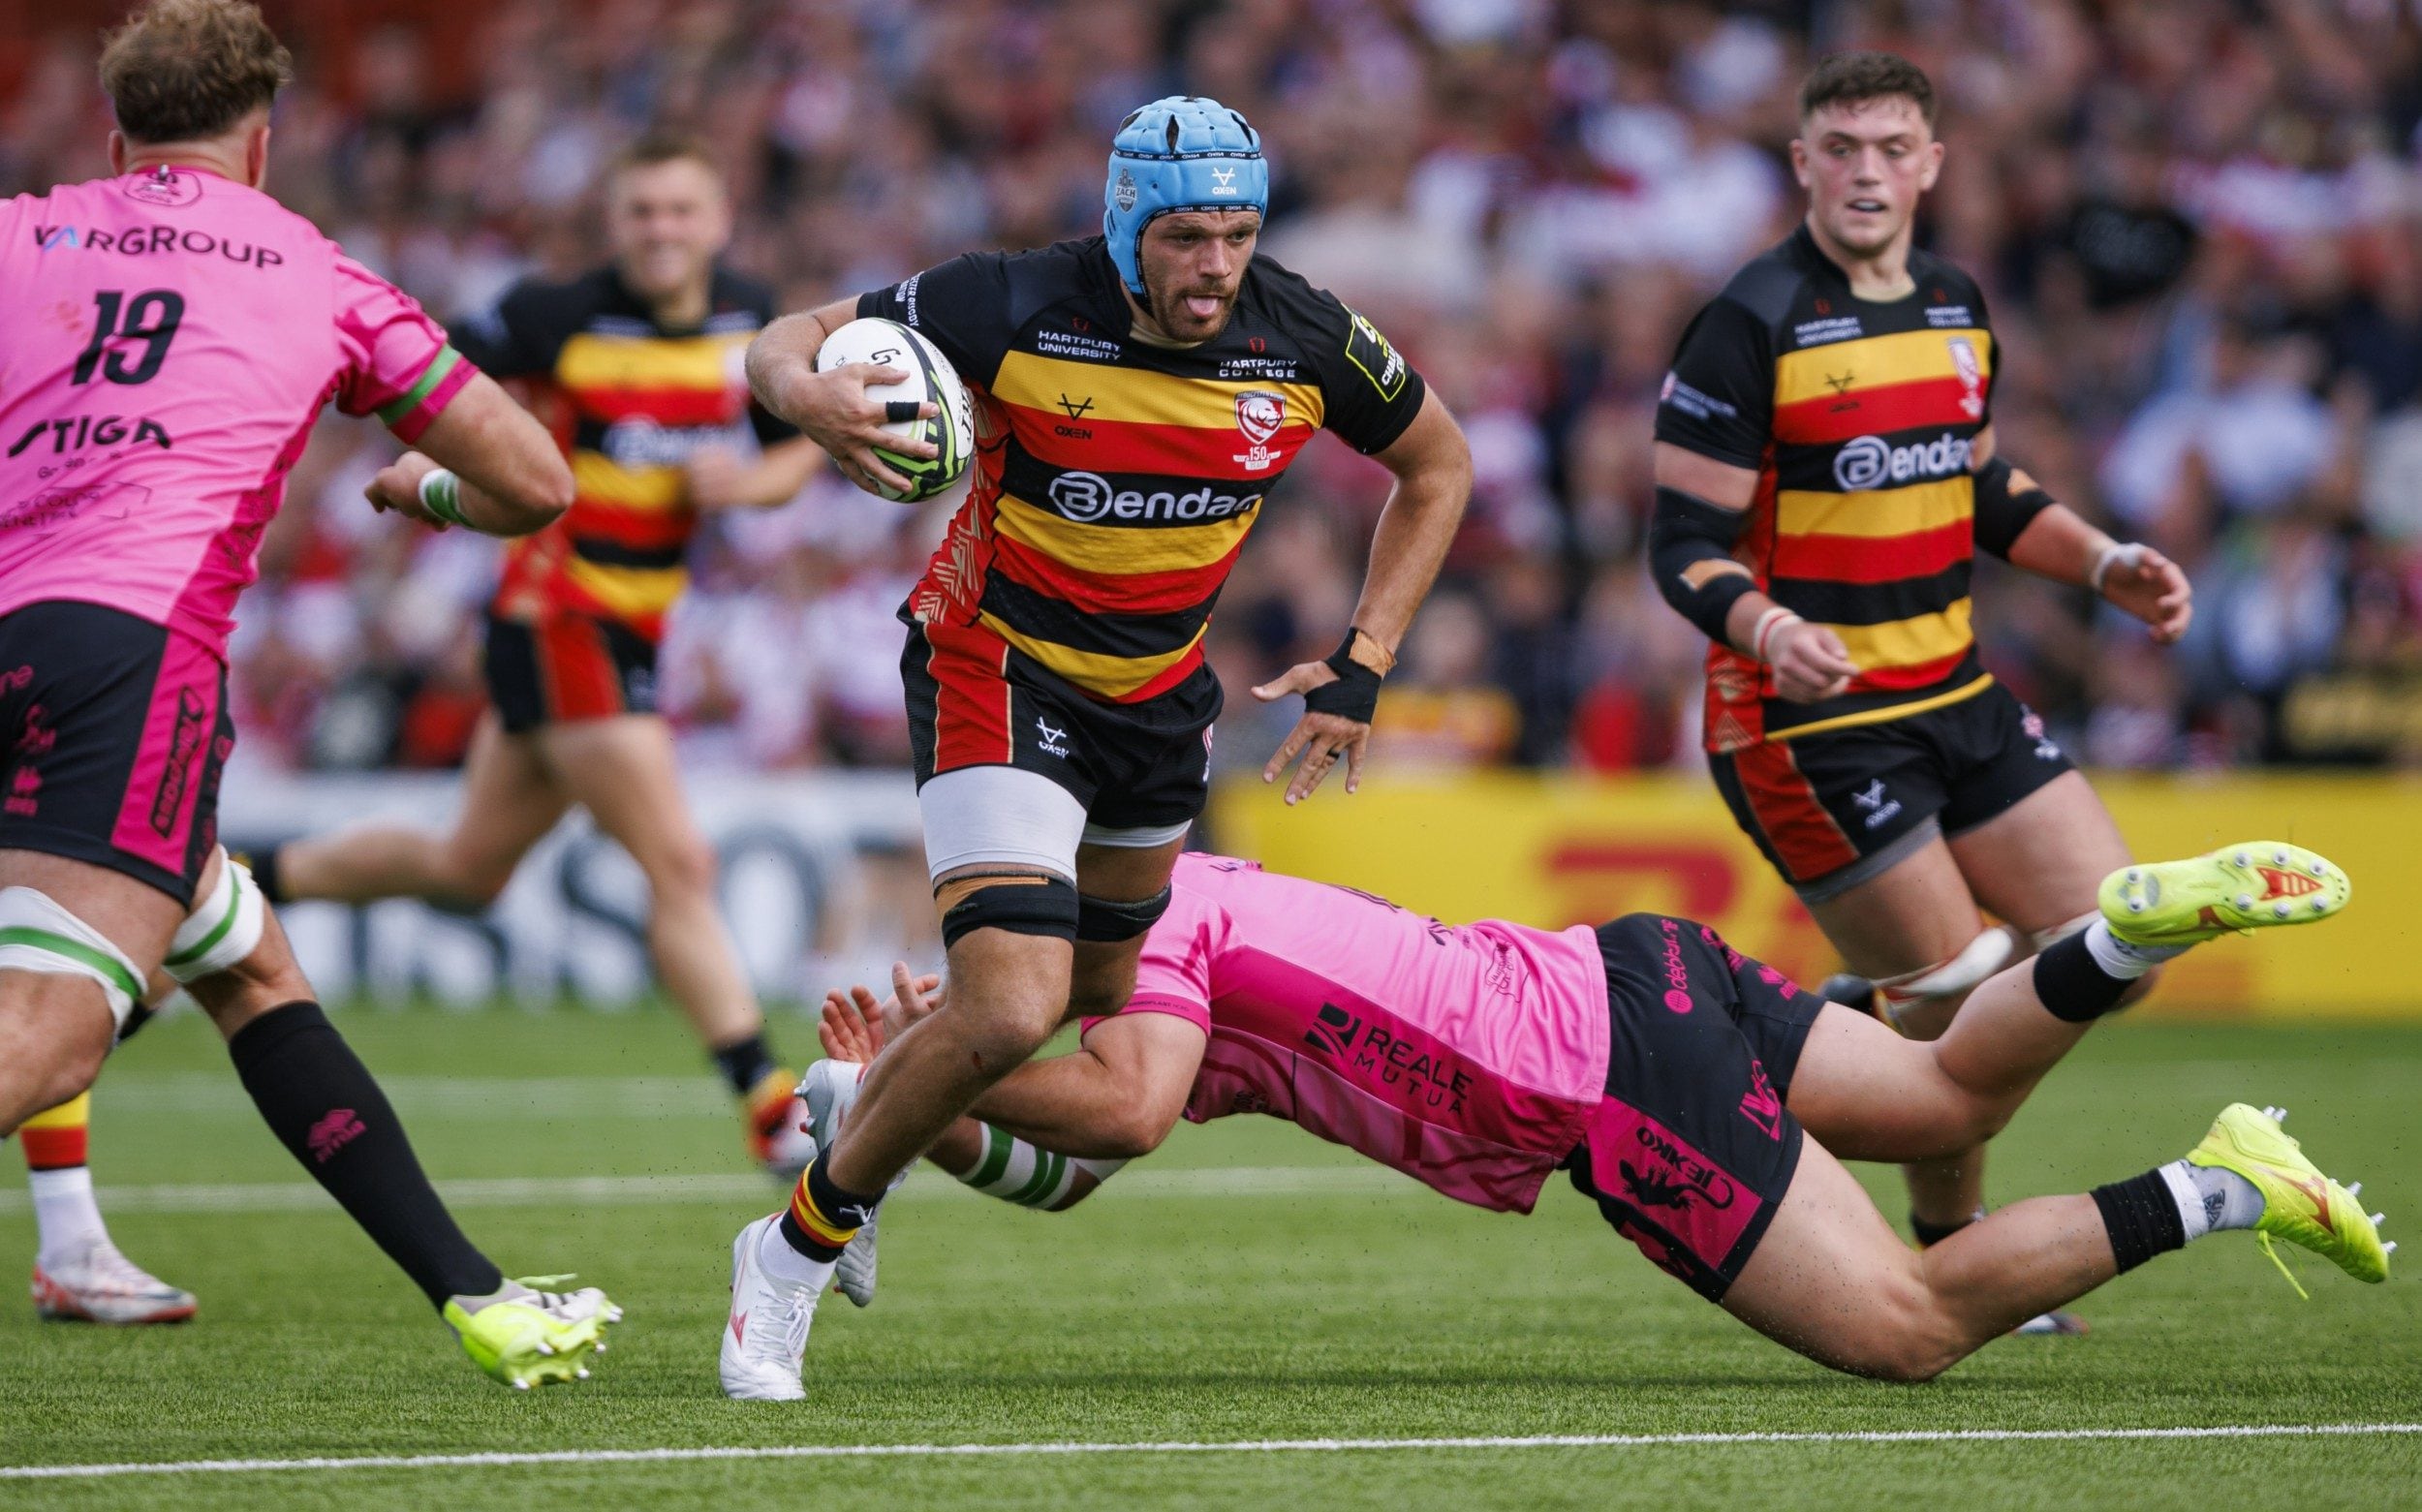 freddie clarke’s ‘big man try’ helps gloucester into challenge cup final after beating benetton